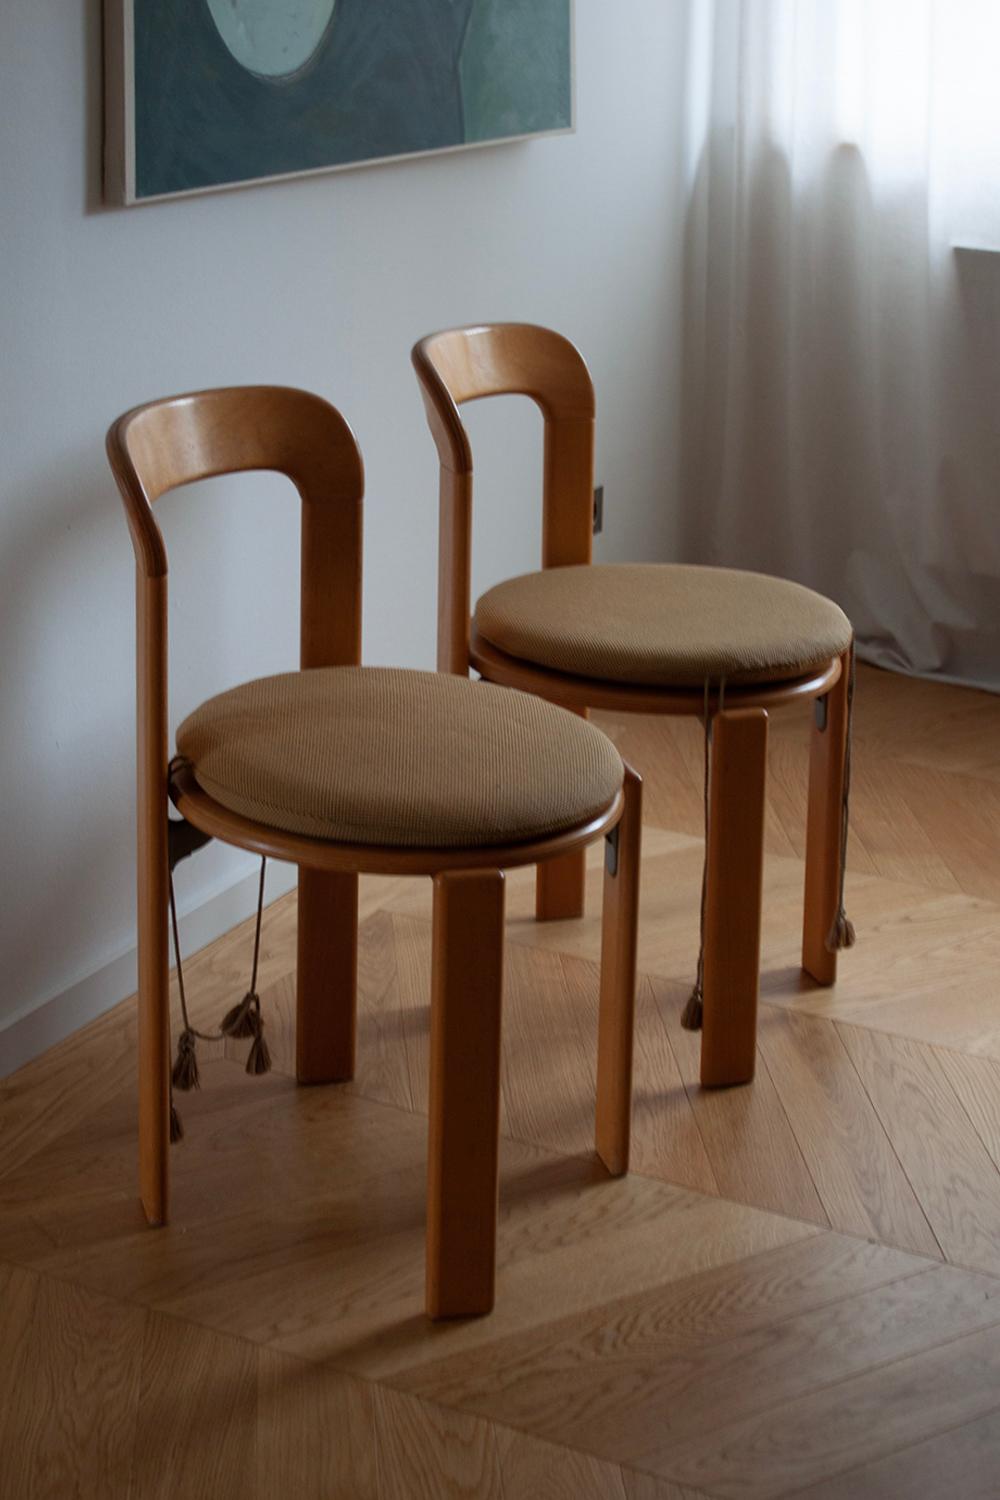 A set of original Bruno Rey chairs cirac 1970. Made by Dietiker in Stein am Rhein, Switzerland.
These swiss design classics have been a staple of Swiss interiors since 1971.
Its minimal, rounded, and timeless shape has never gone out of style. The